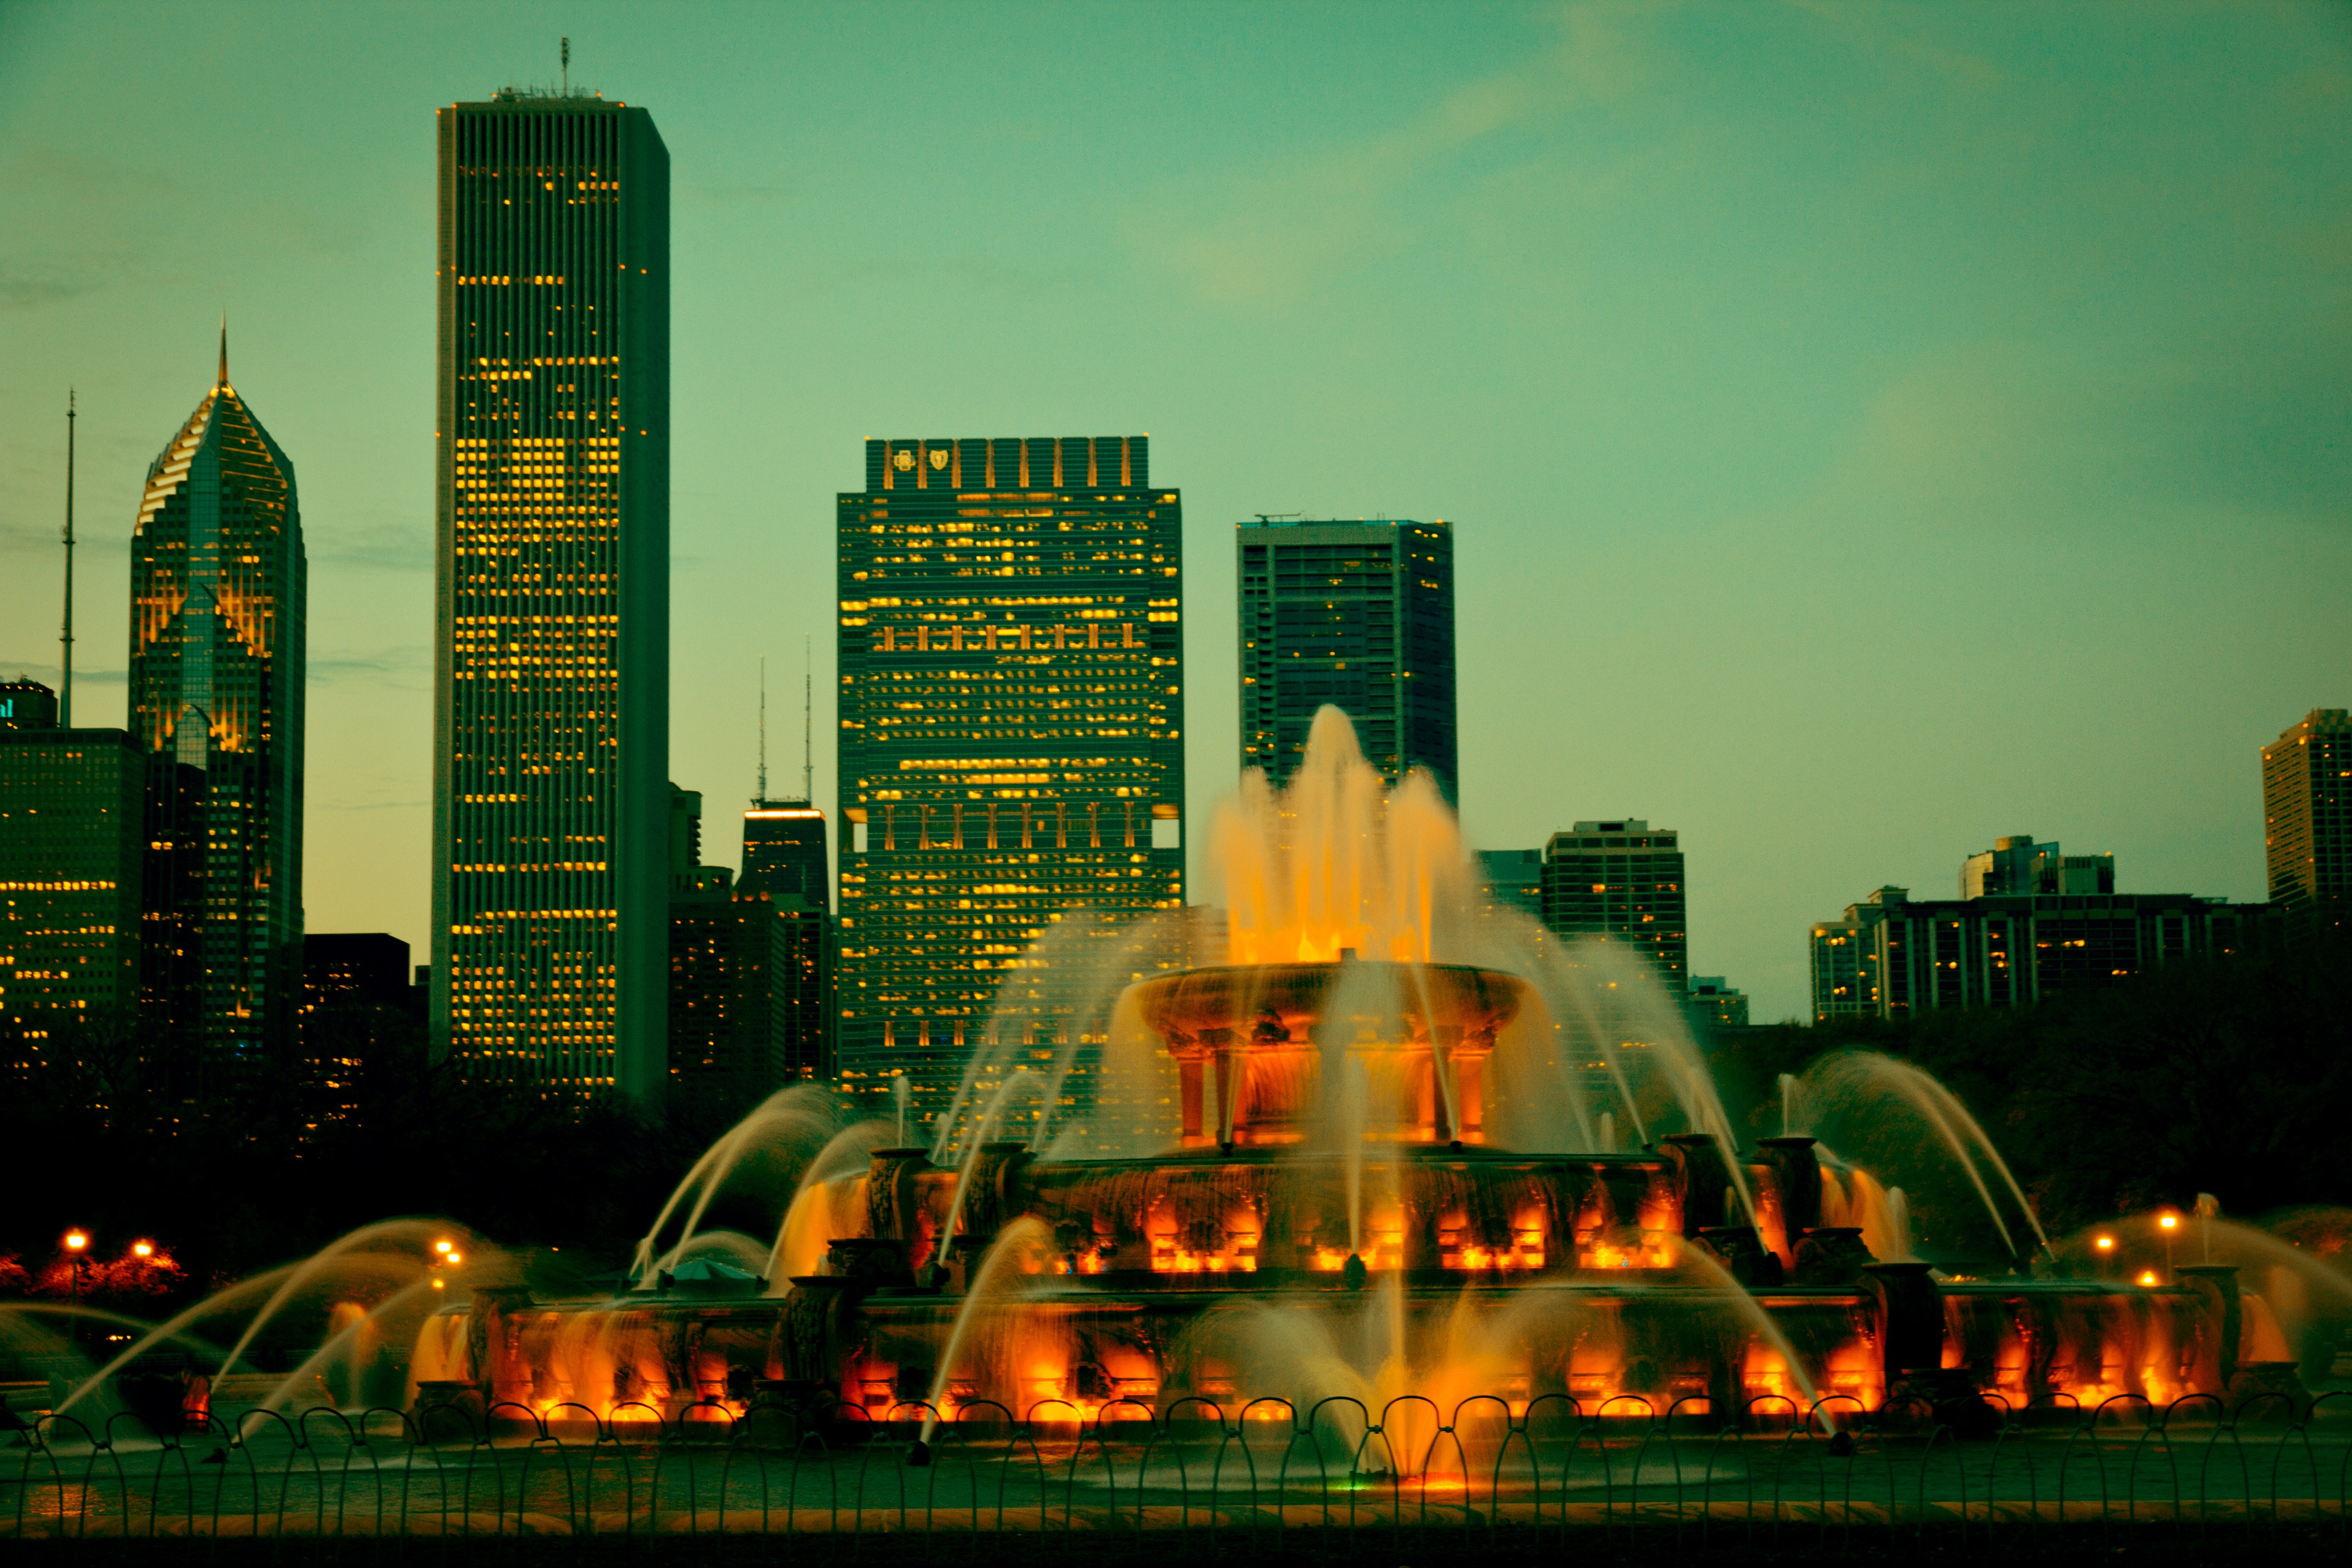 usa, Fountains, Houses, Chicago, City, Illinois, Cities Wallpaper